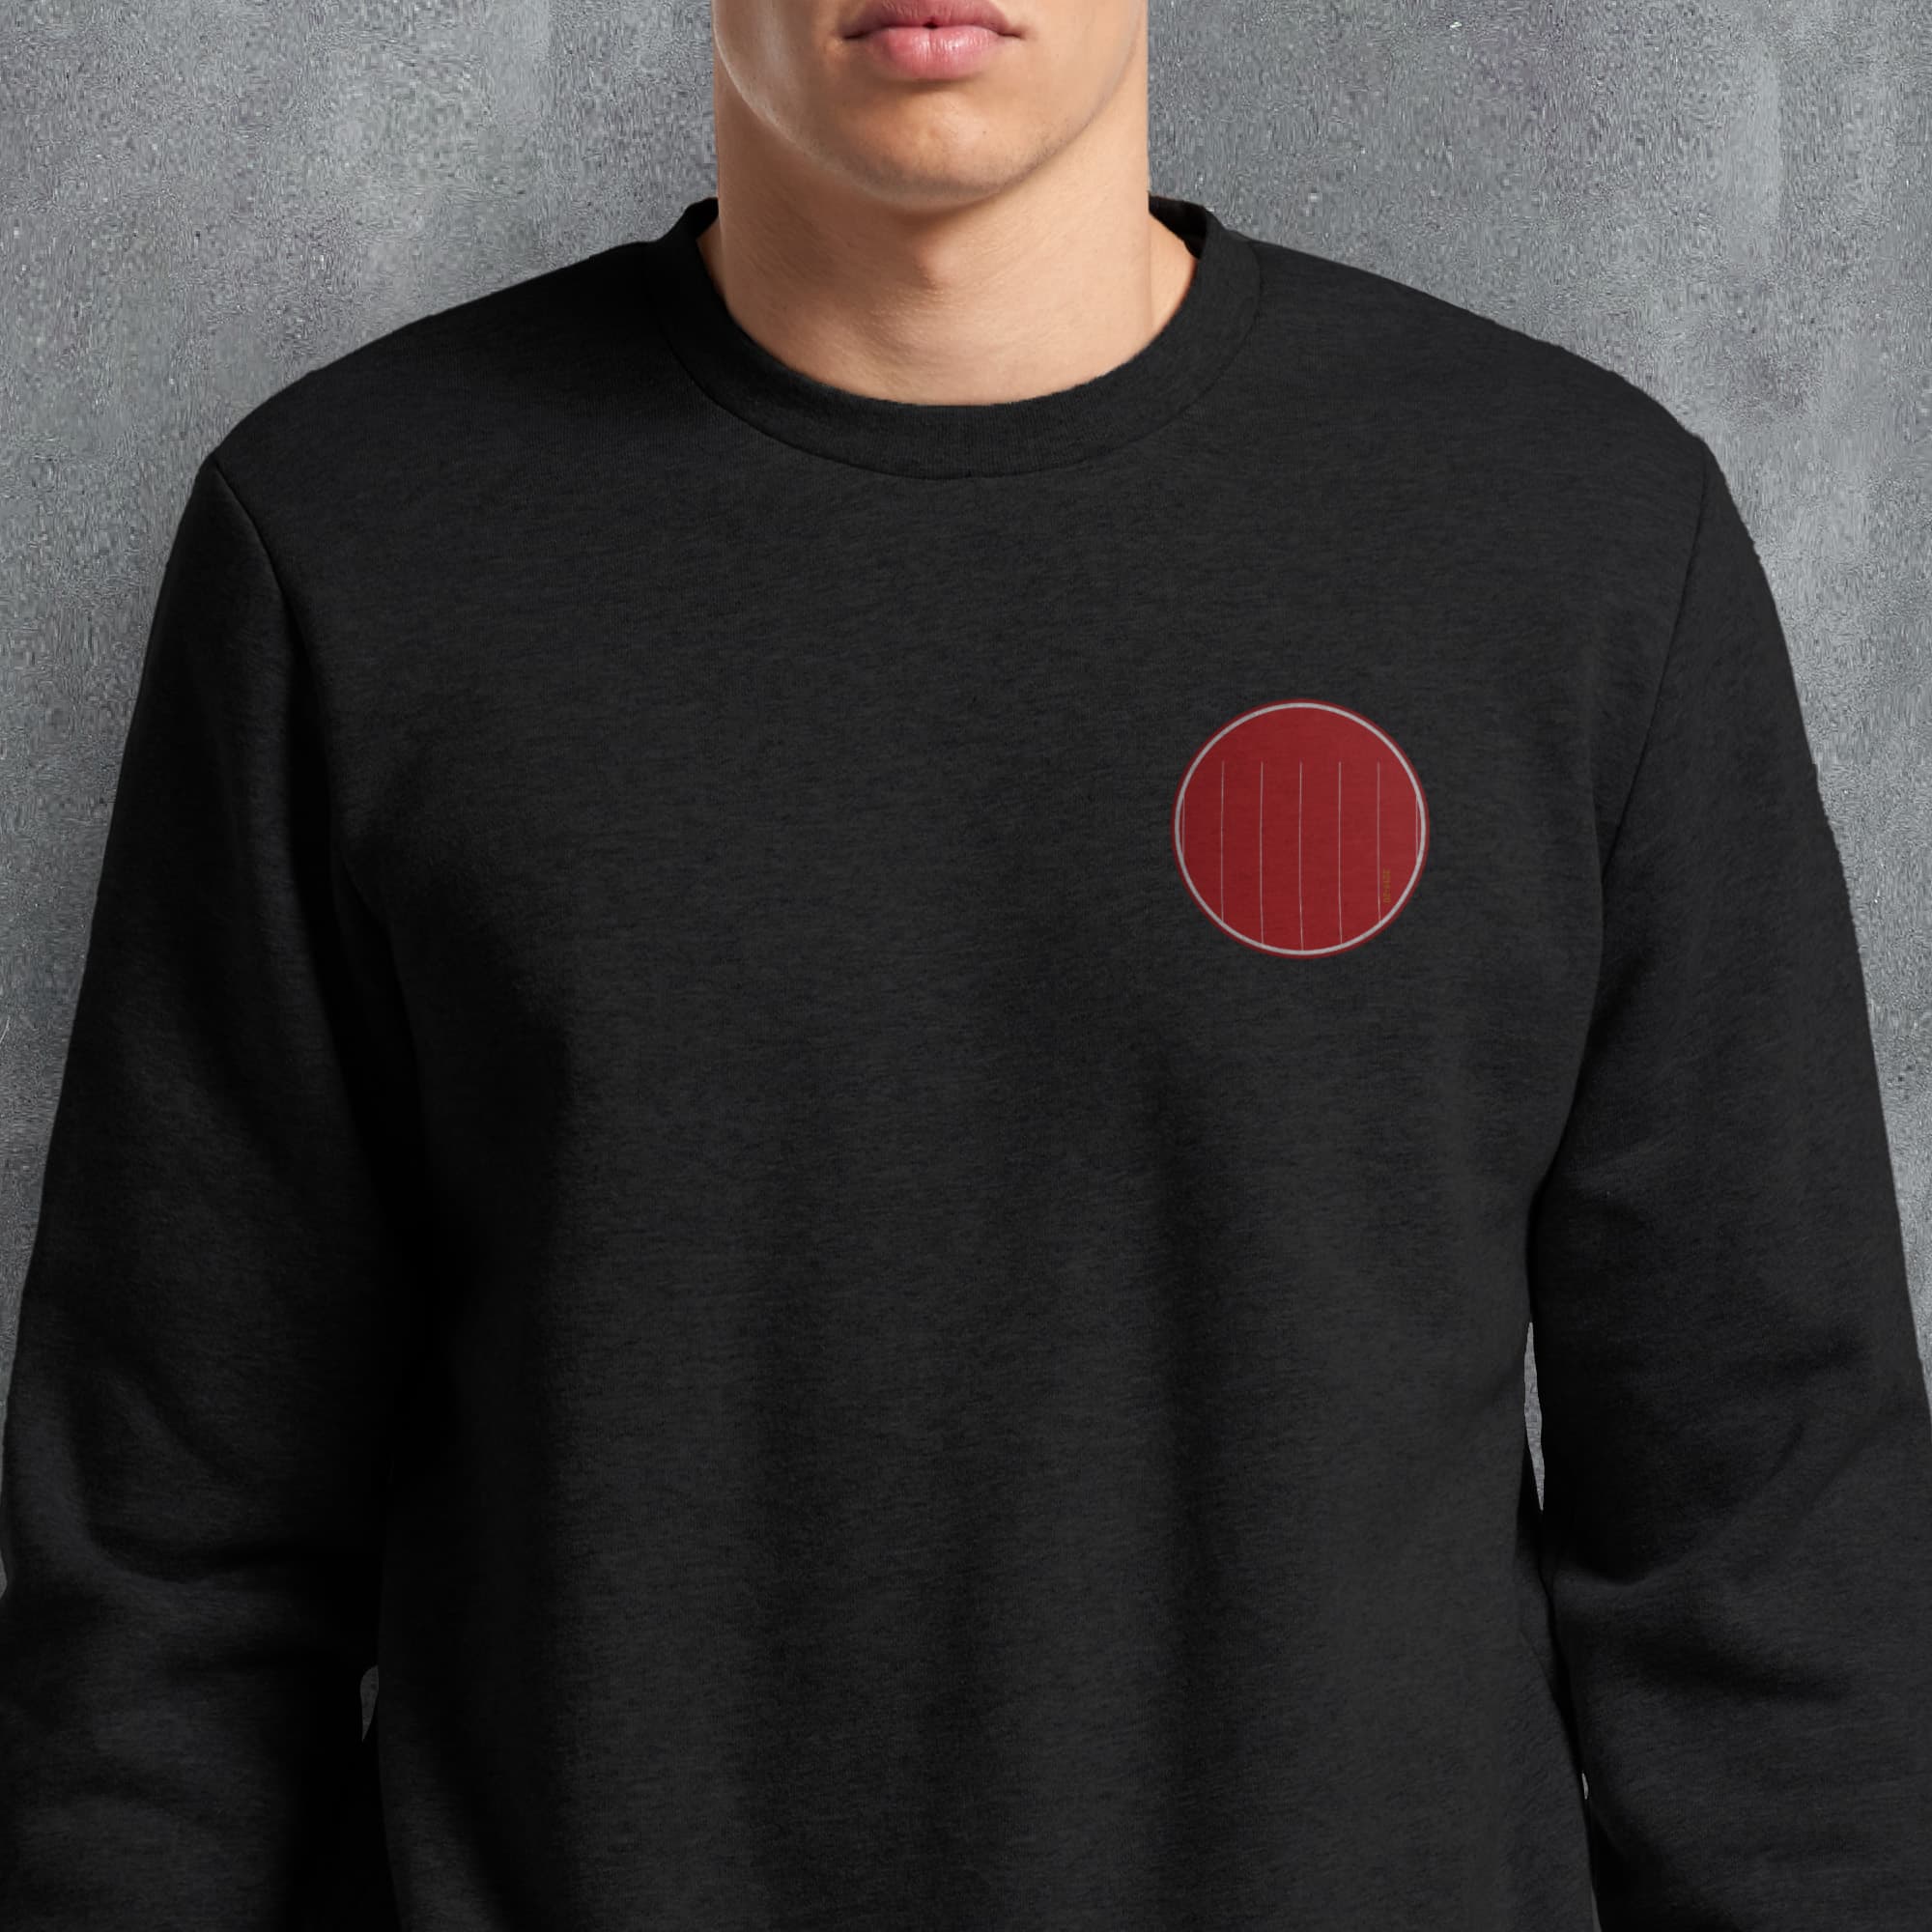 a man wearing a black sweater with a red circle on it